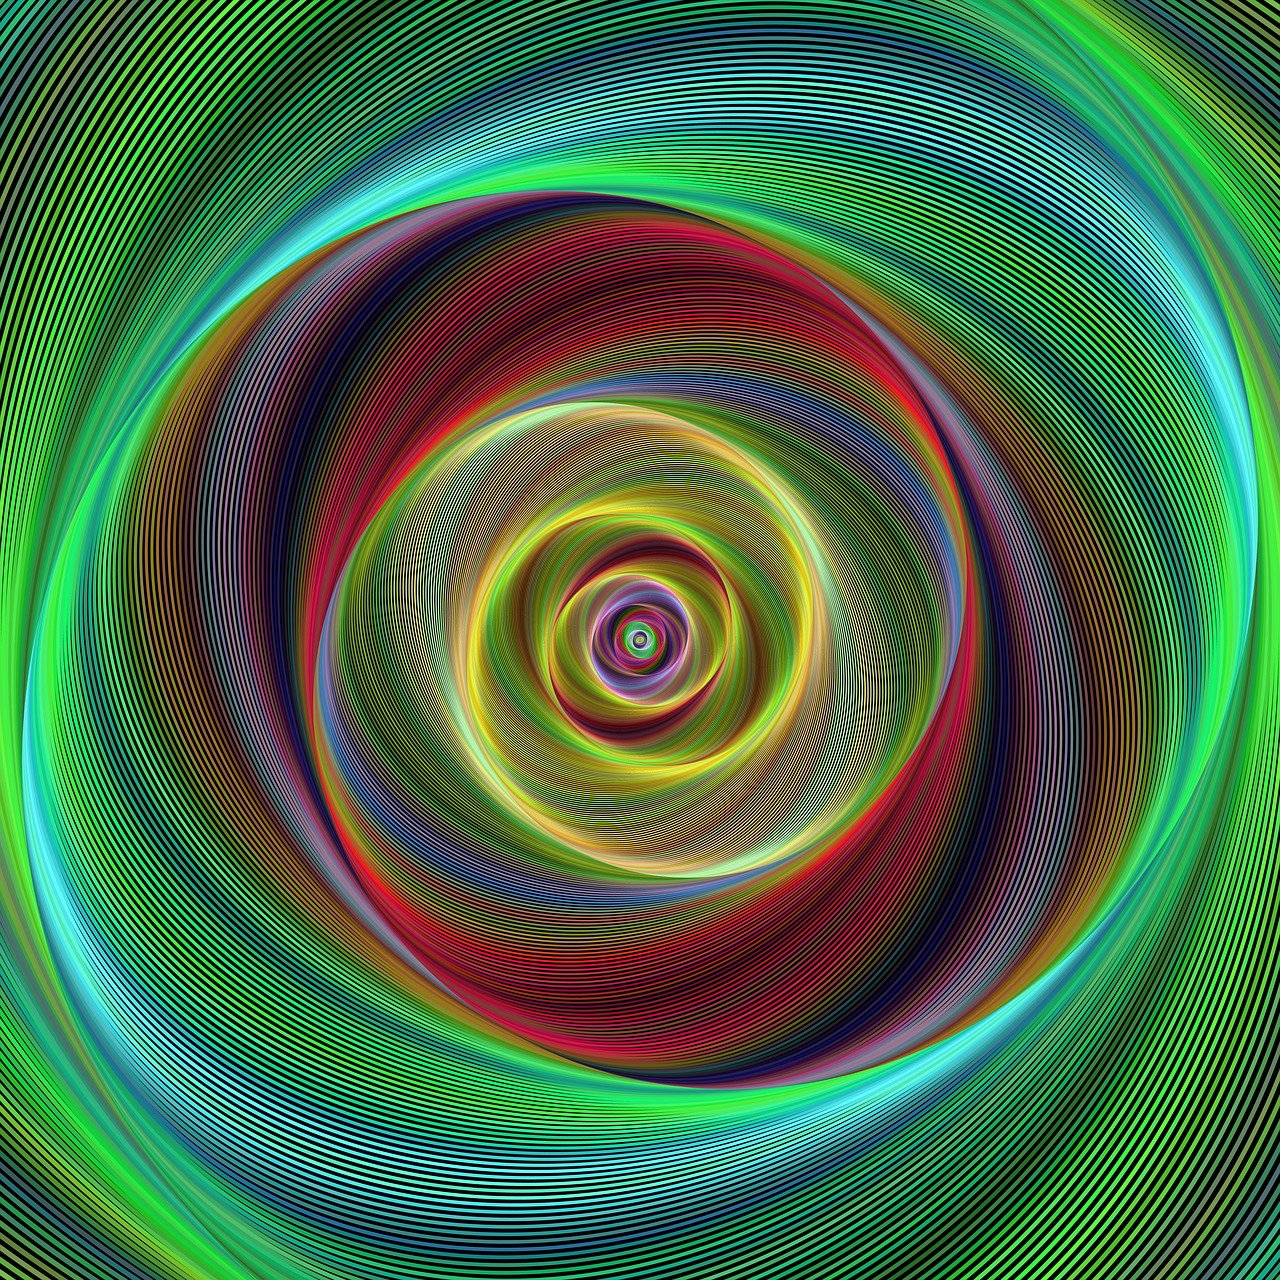 a computer generated image of a colorful spiral, inspired by Lorentz Frölich, generative art, portrait of a mystical giant eye, green and red tones, bottom shot, forcefield